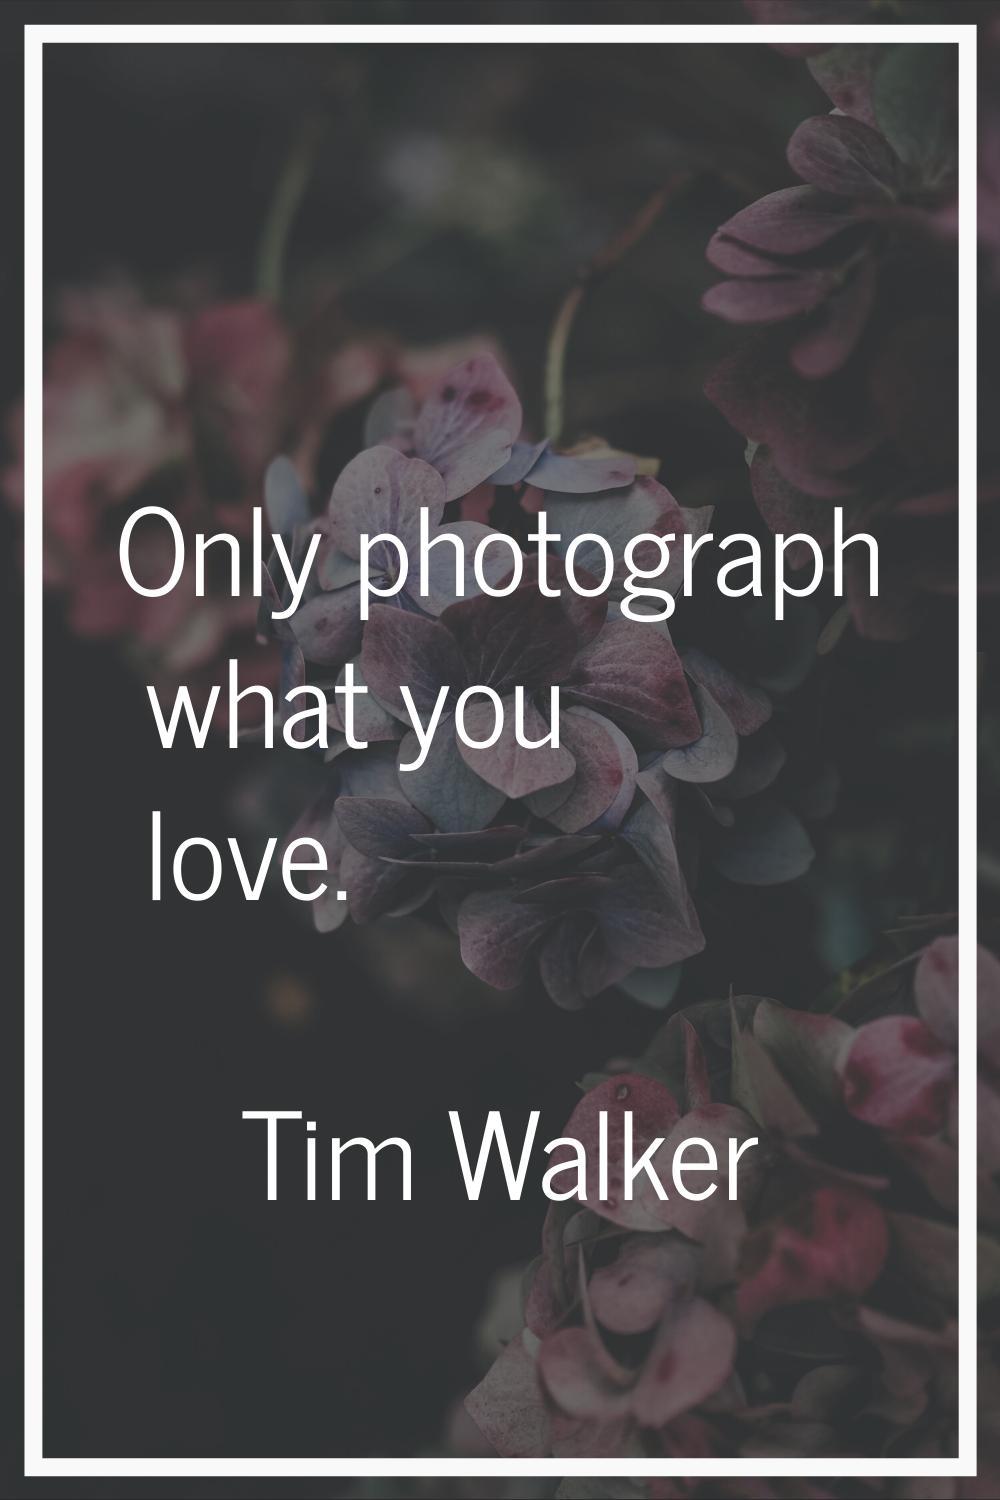 Only photograph what you love.